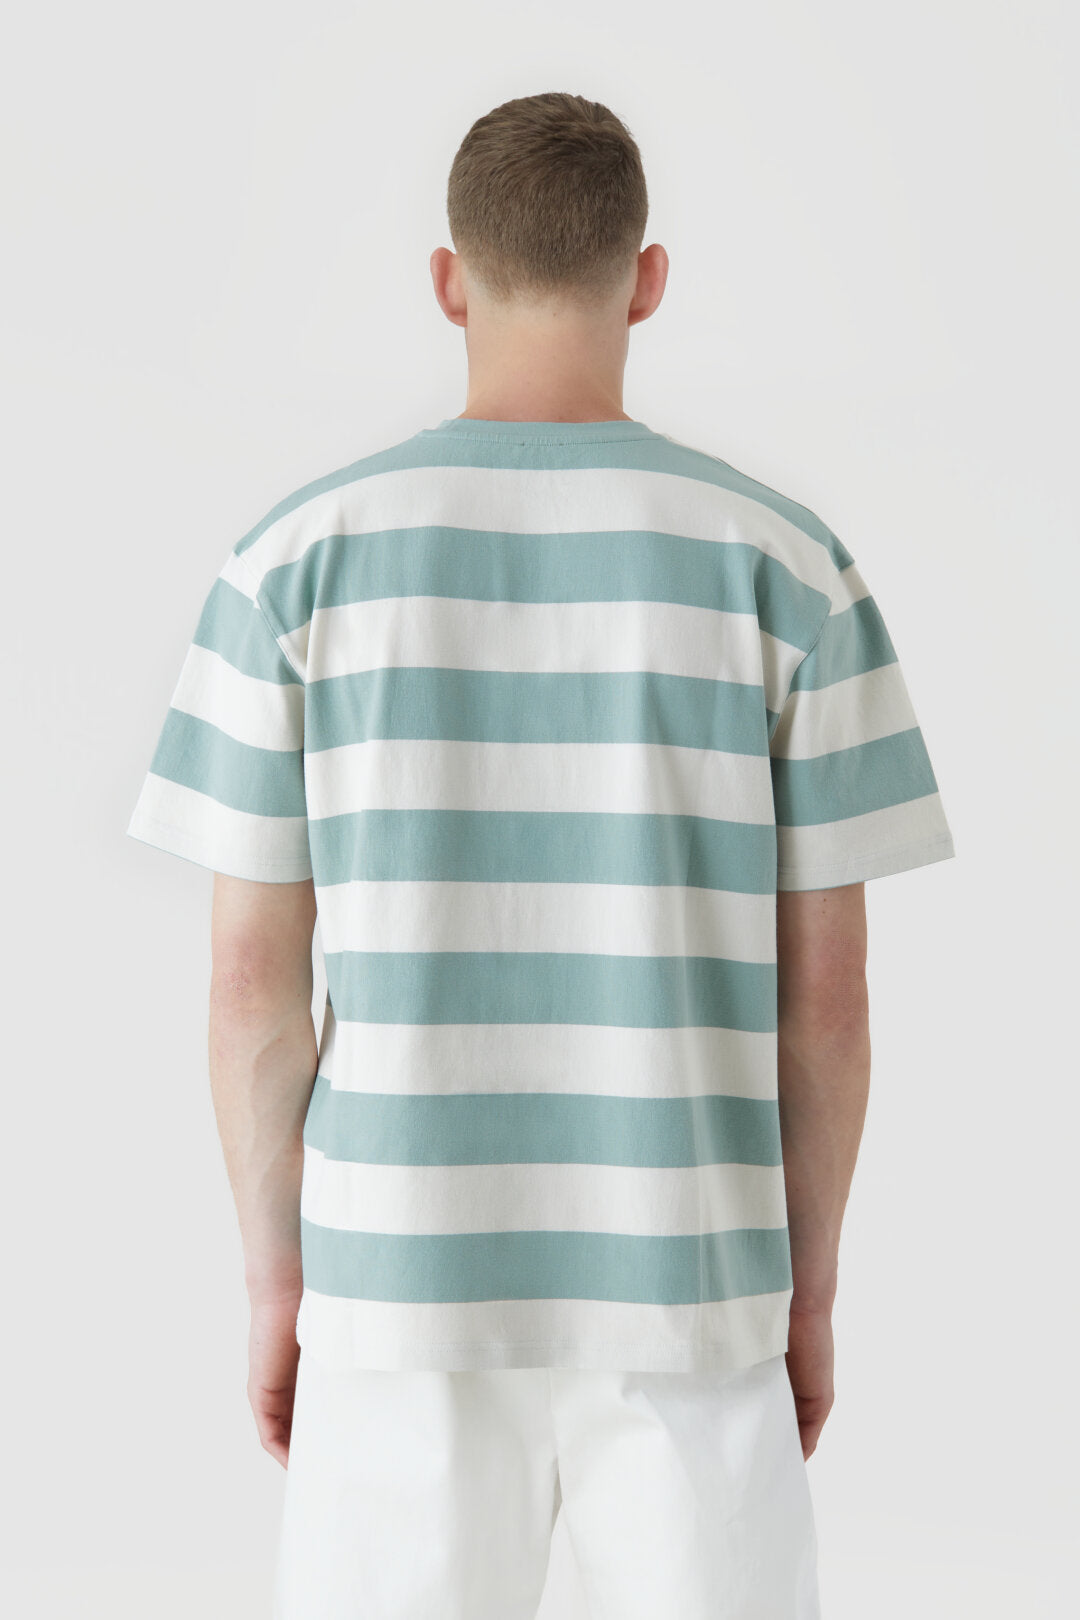 CLOSED MENS STRIPED T-SHIRT - BLUE AGAVE